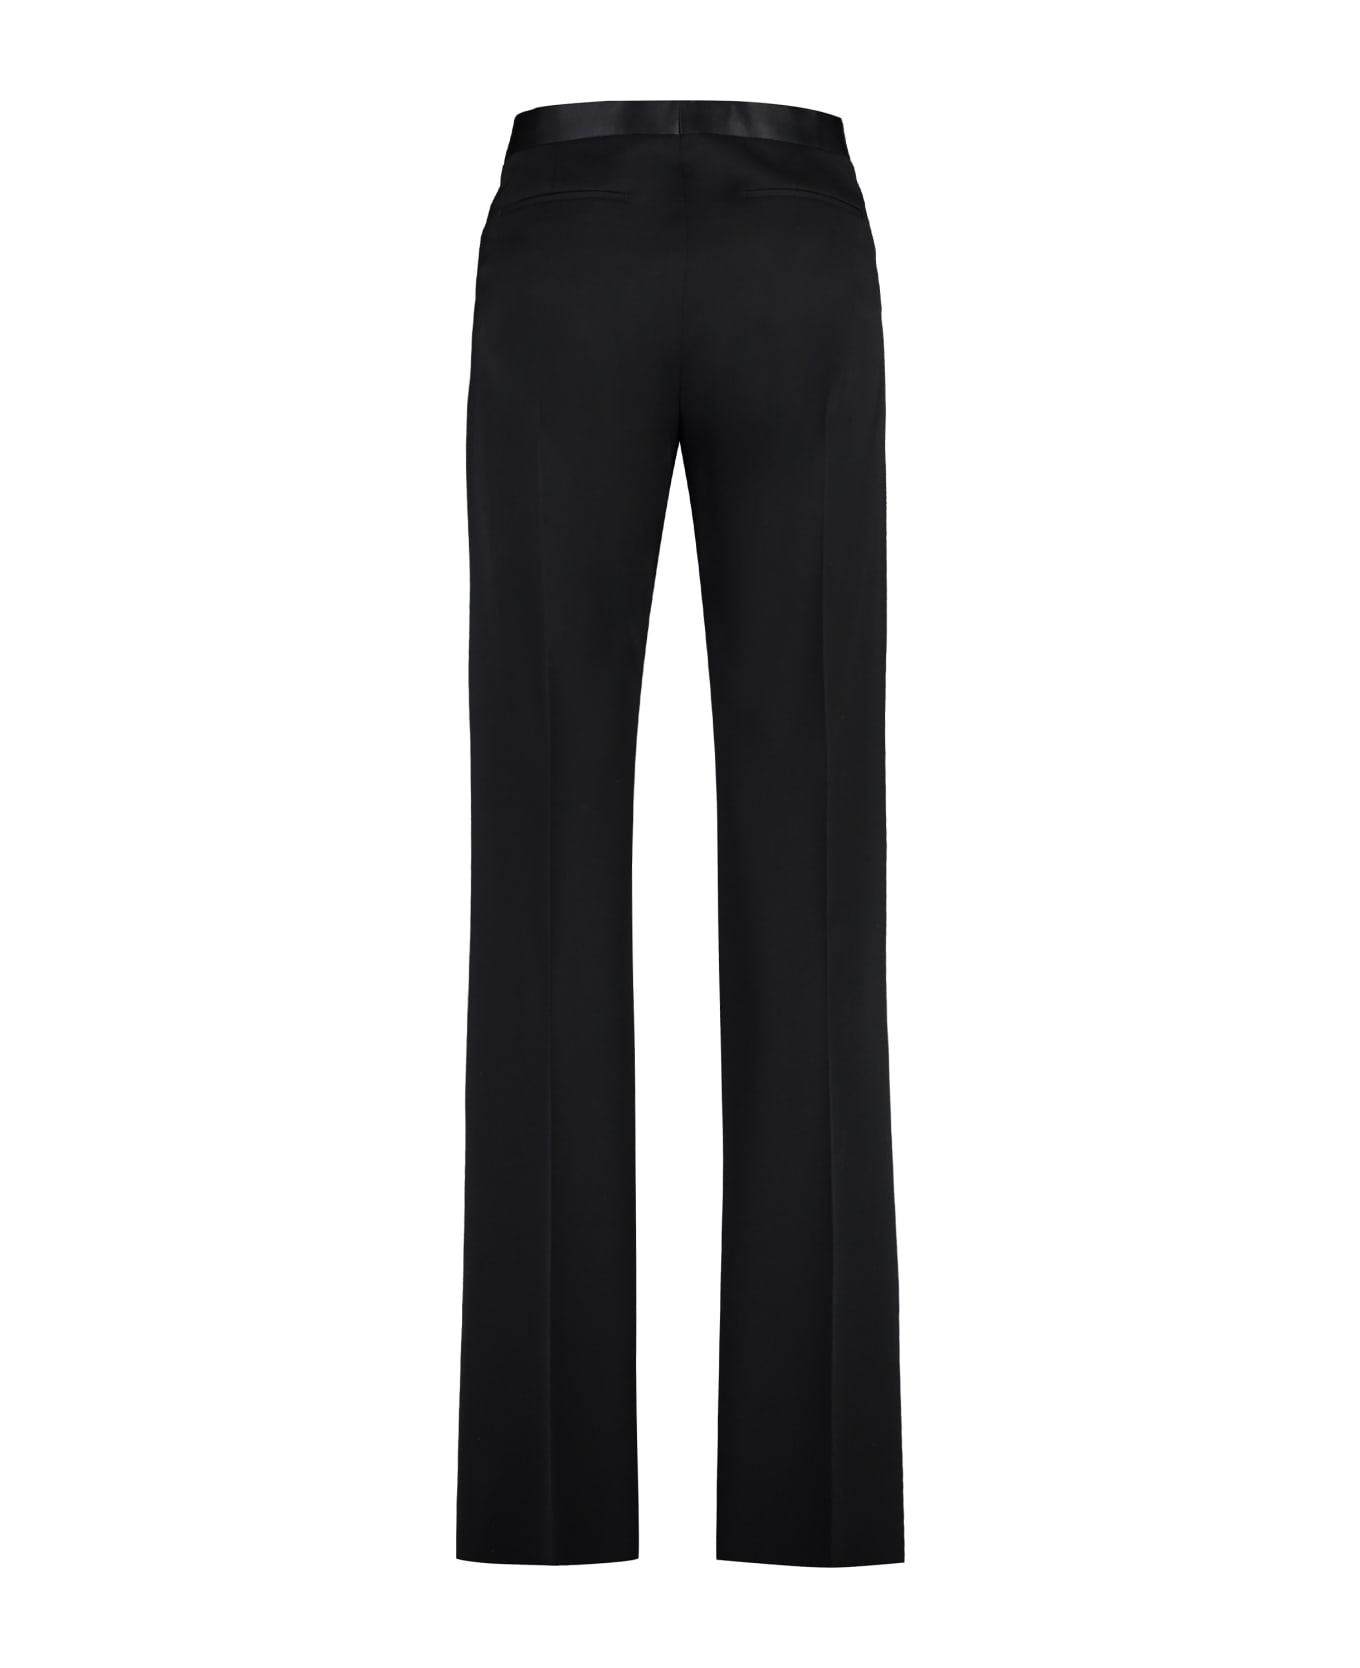 Givenchy Tailored Wool Trousers - black